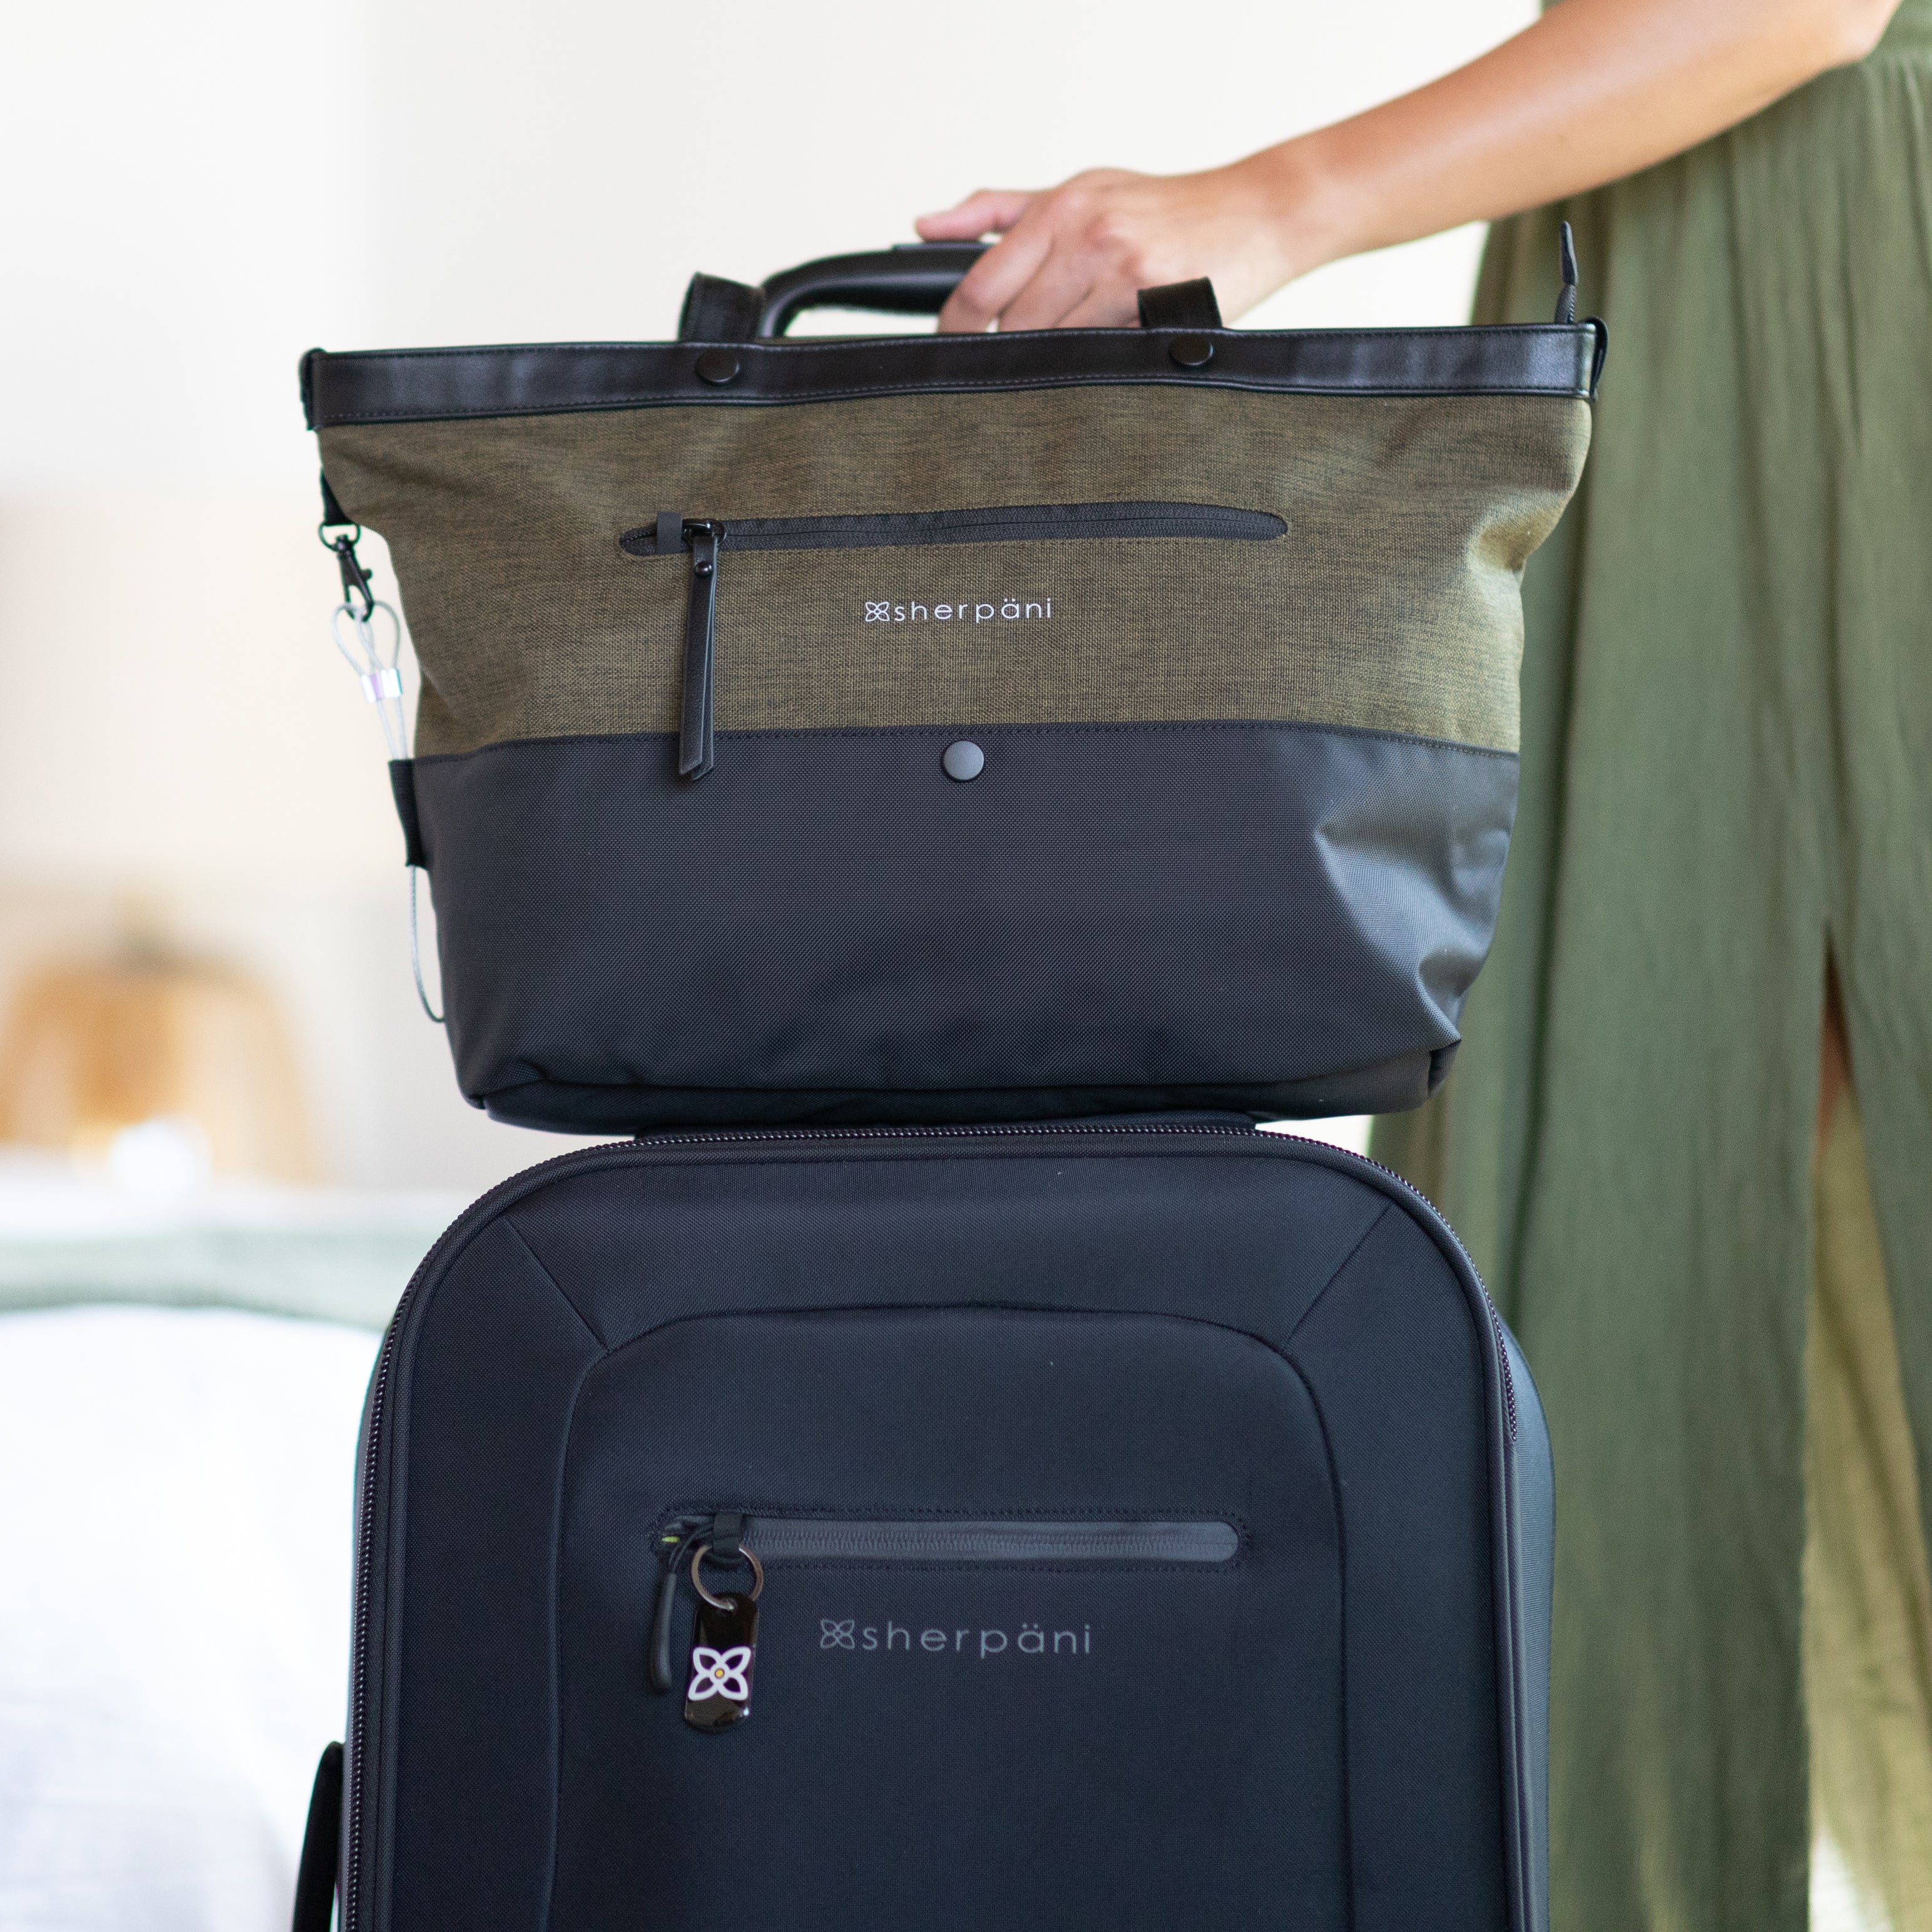 Sherpani Anti-Theft tote bag, the Cali in Loden, sitting on top of Sherpani soft-shell carry-on luggage, the Latitude, utilizing the luggage pass through feature. 